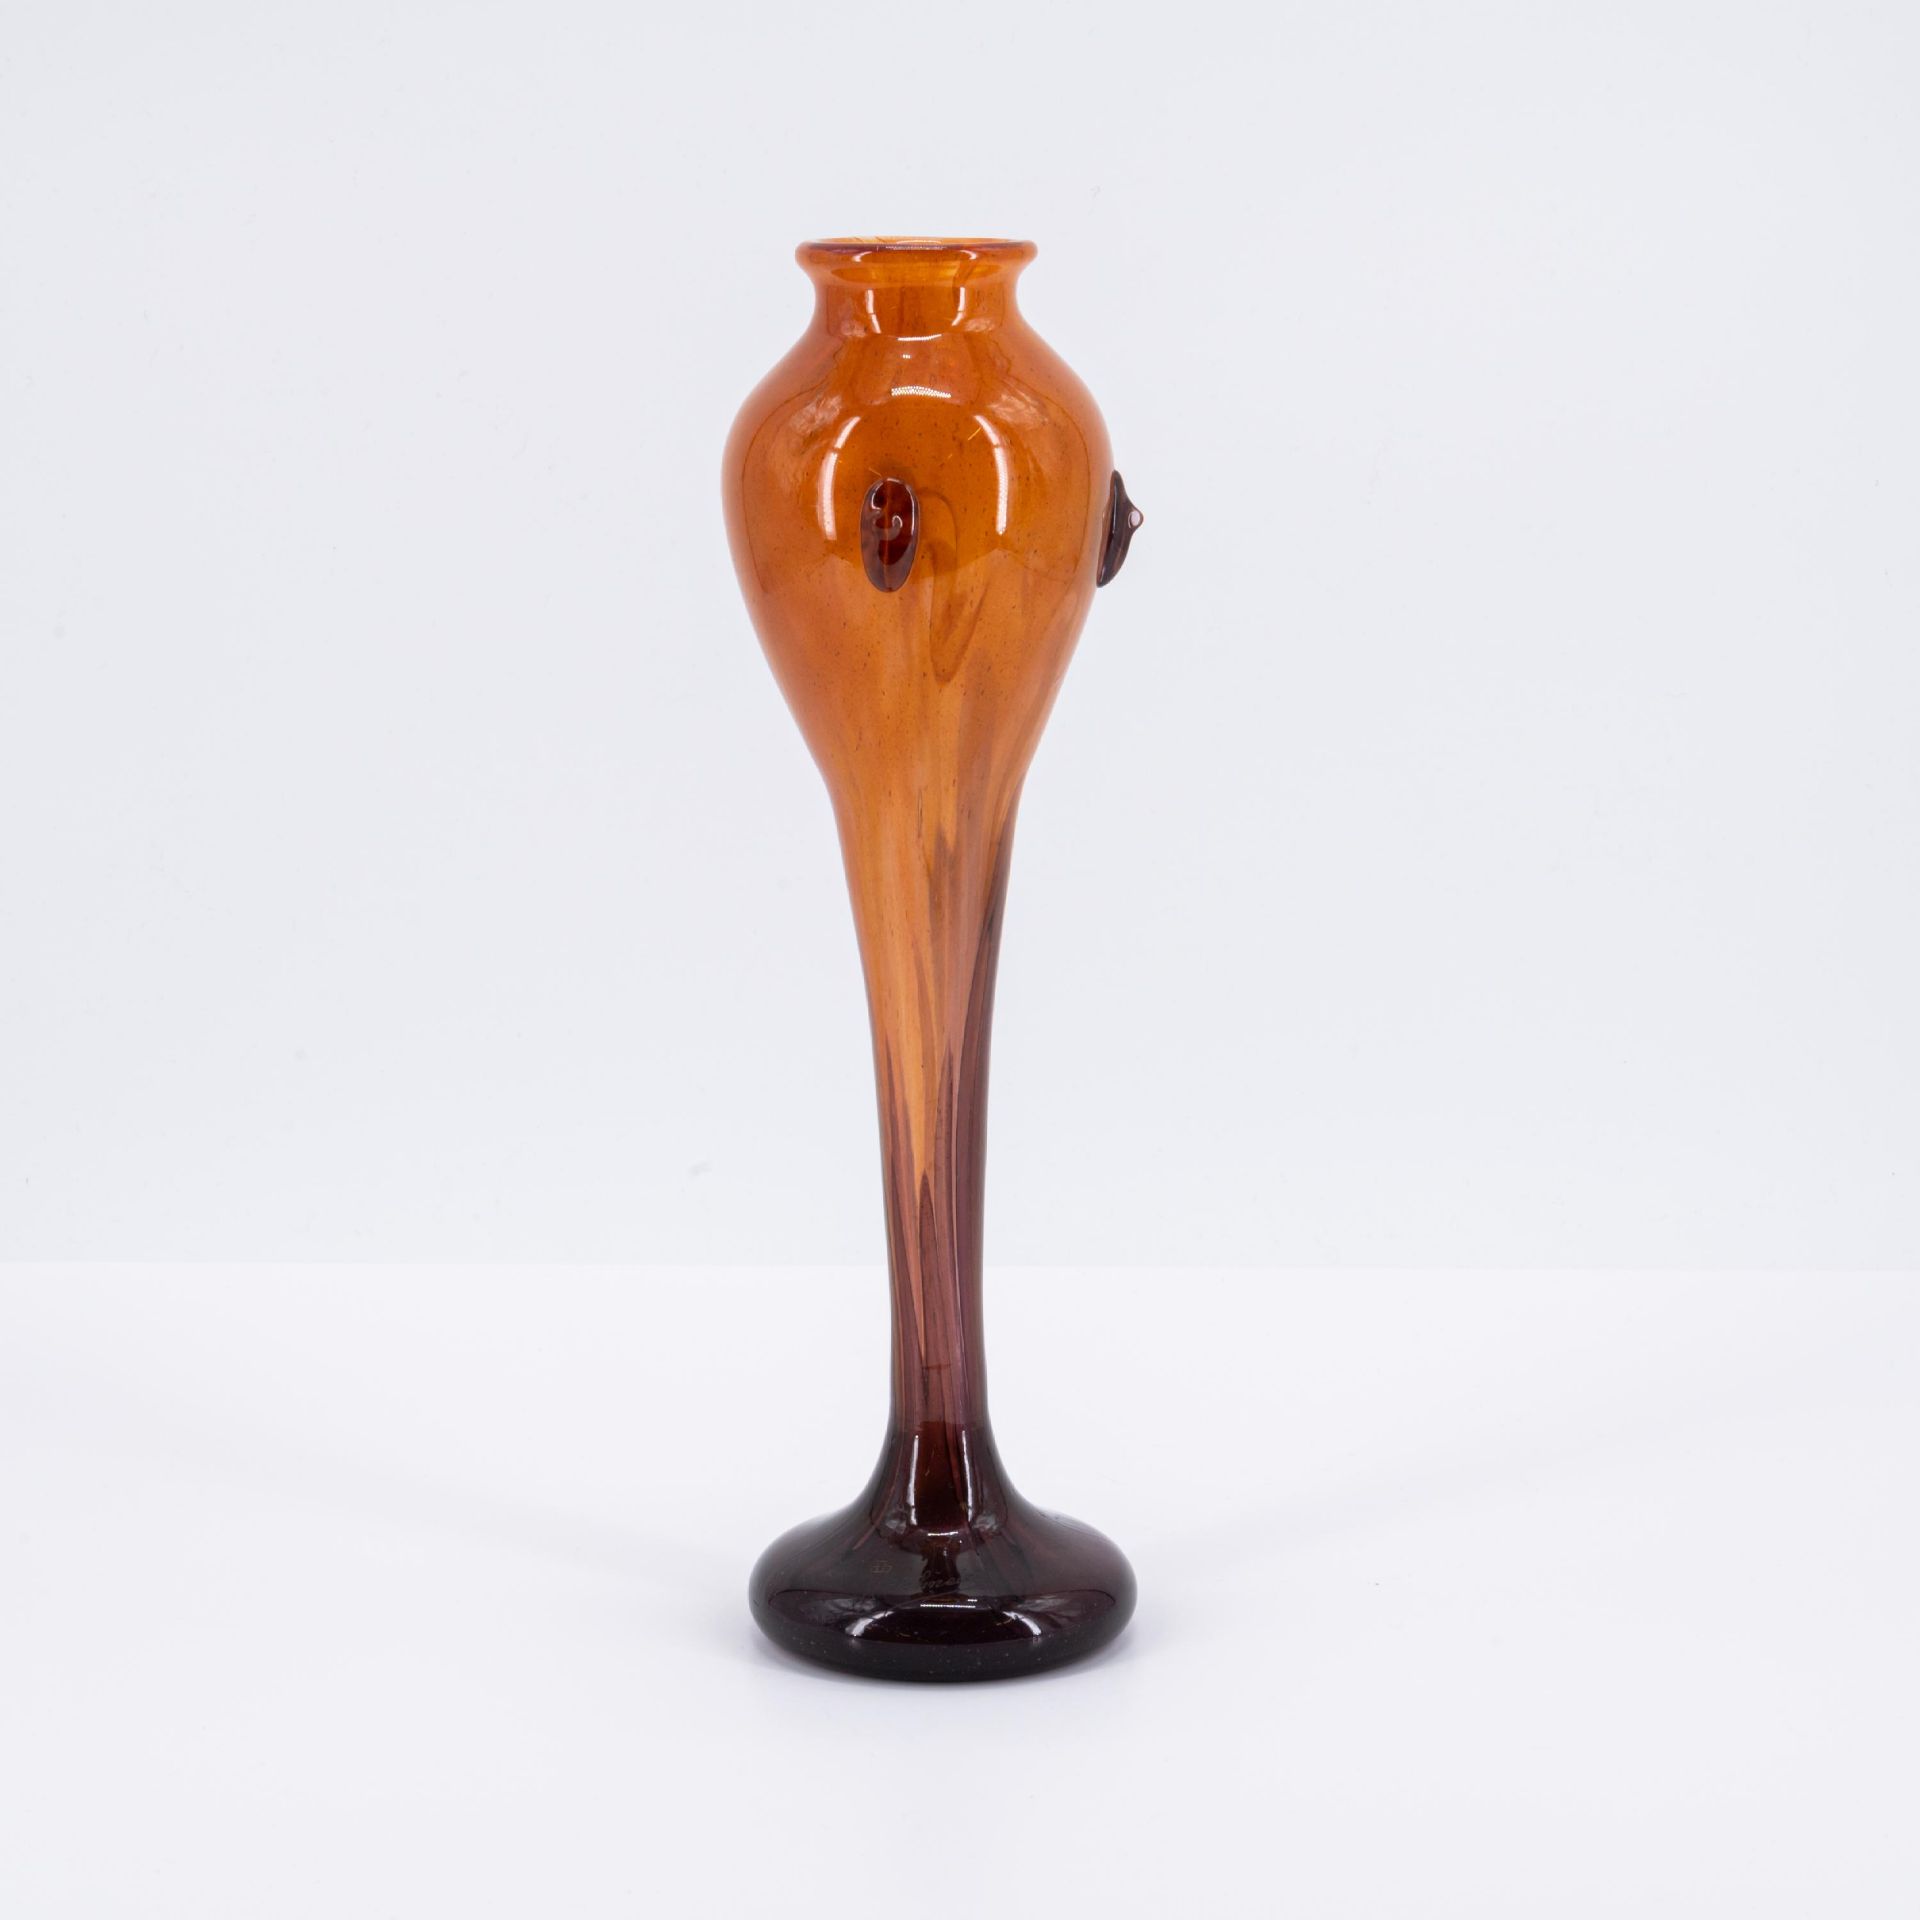 Slim baluster vase with studs - Image 4 of 7